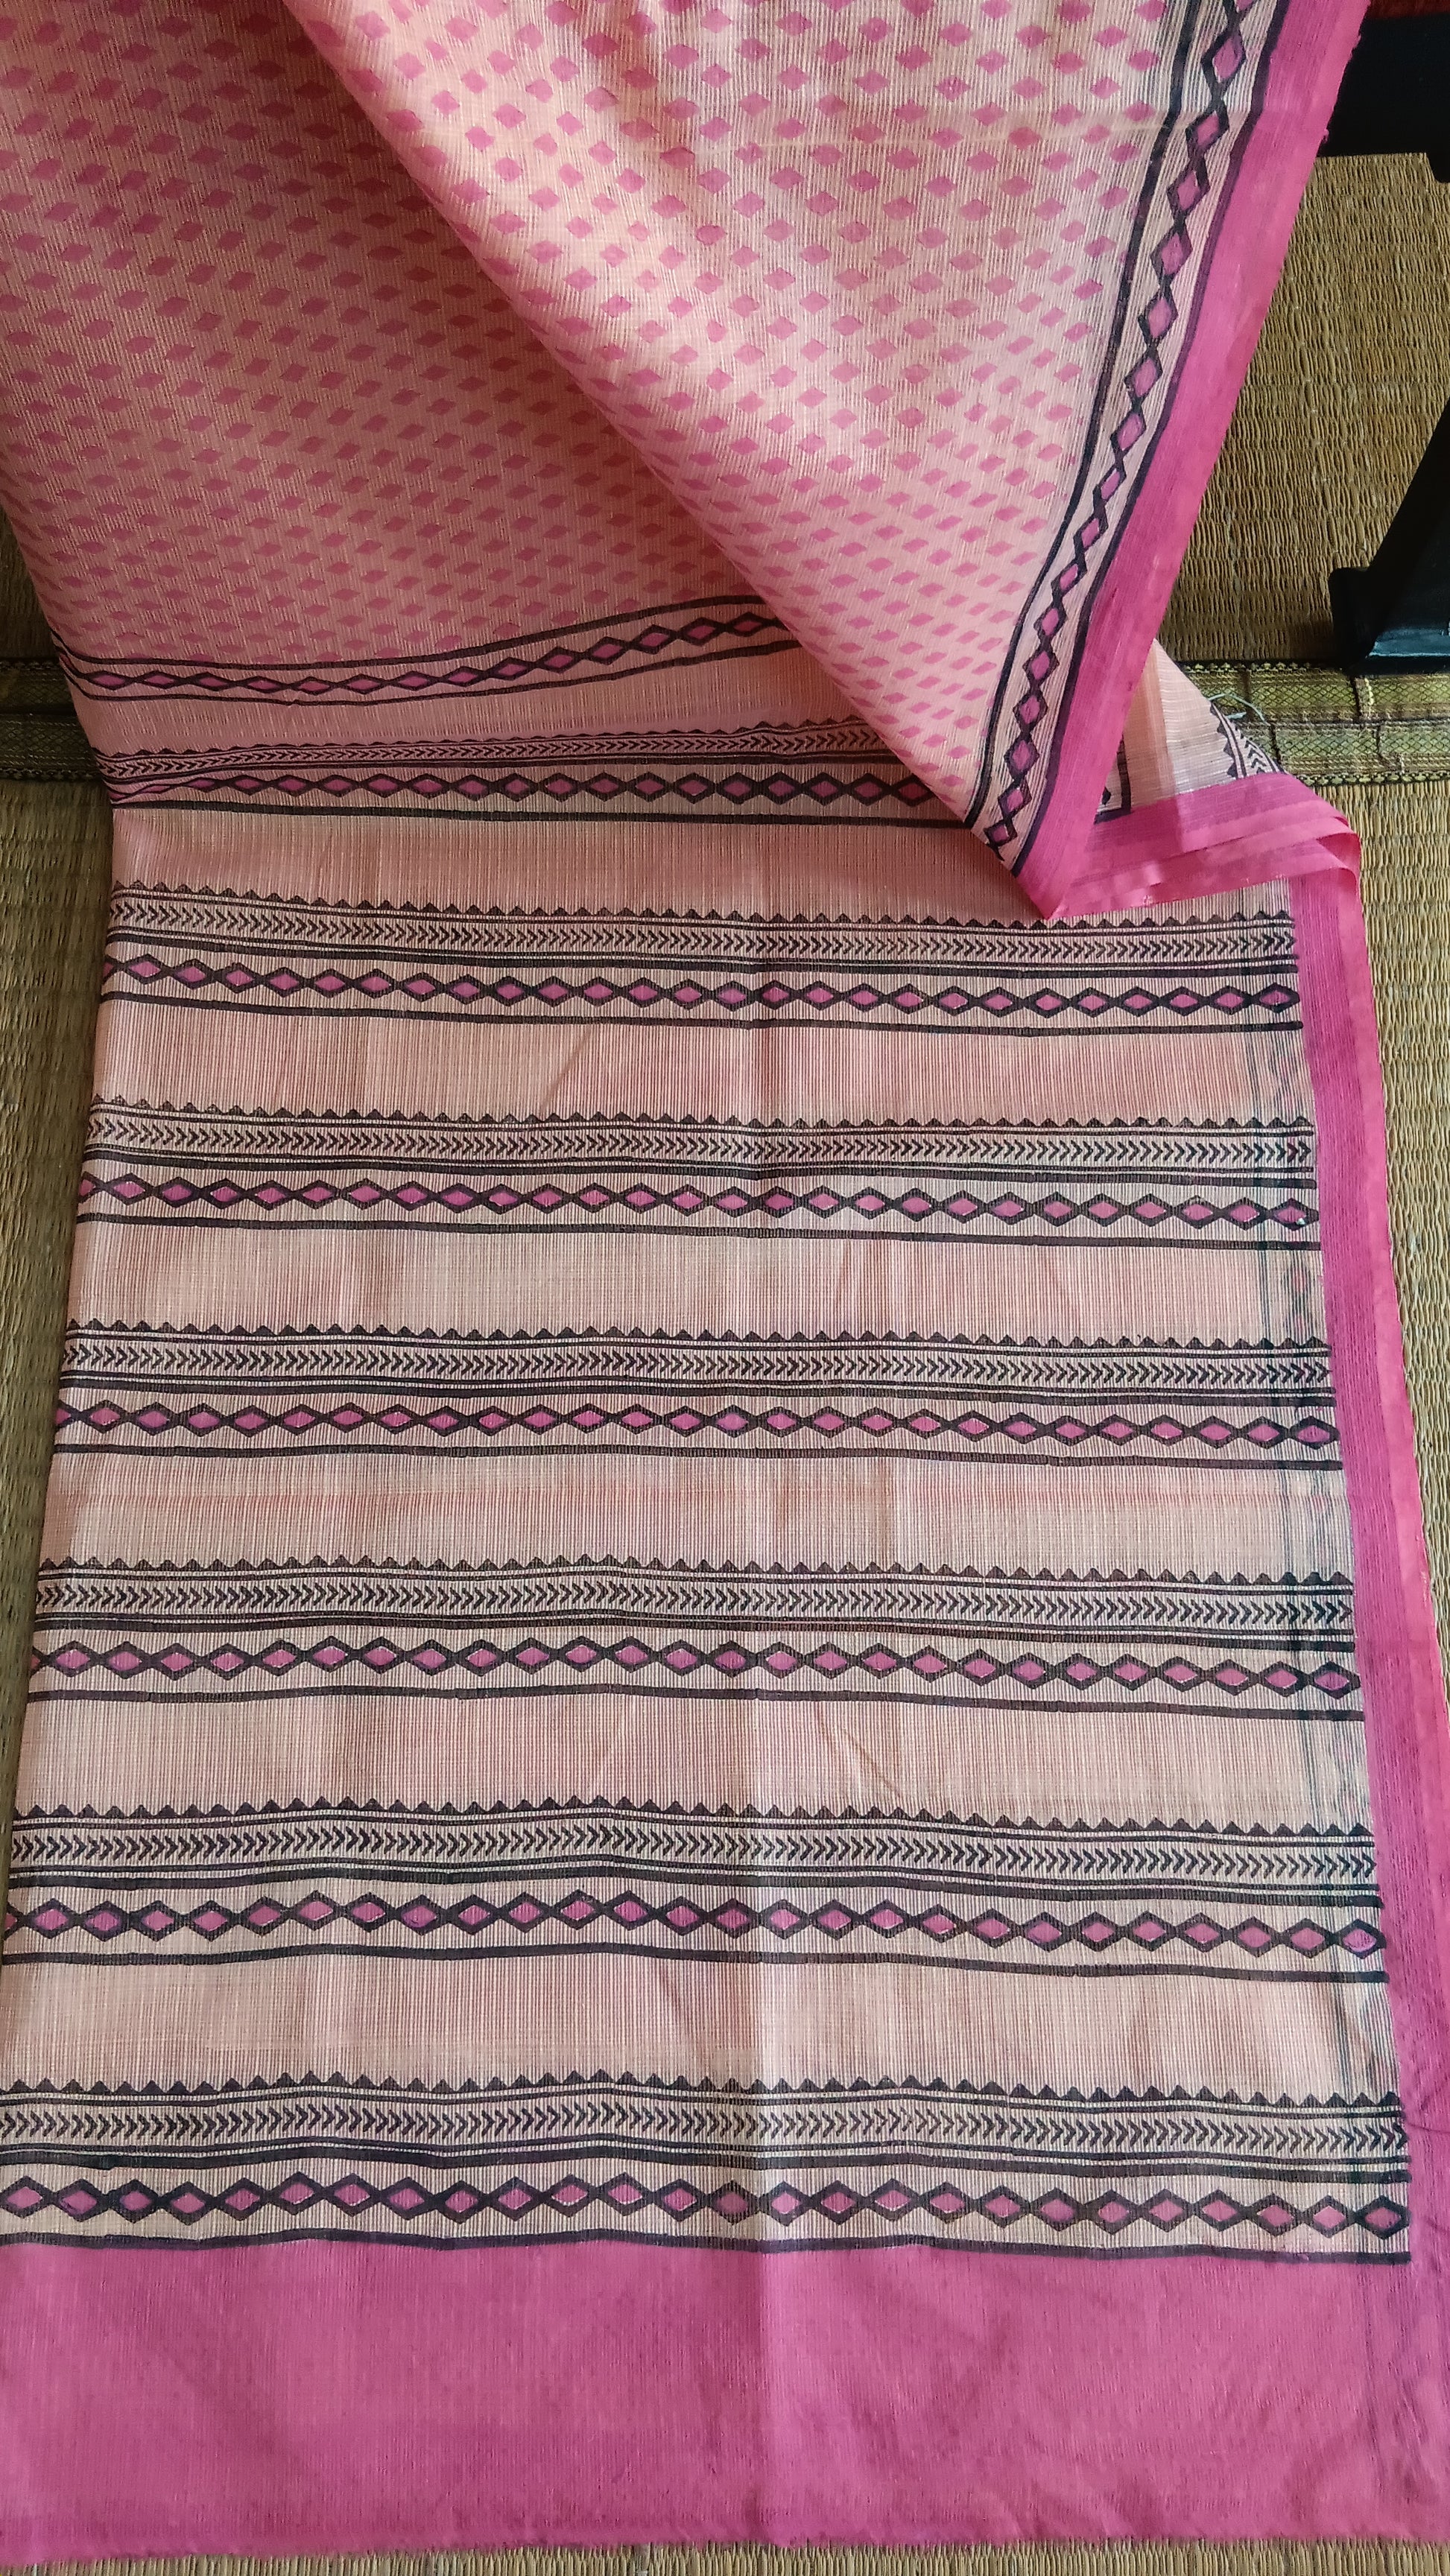 View from the top of the block printed pallu of a pink light weight daily wear kota cotton saree